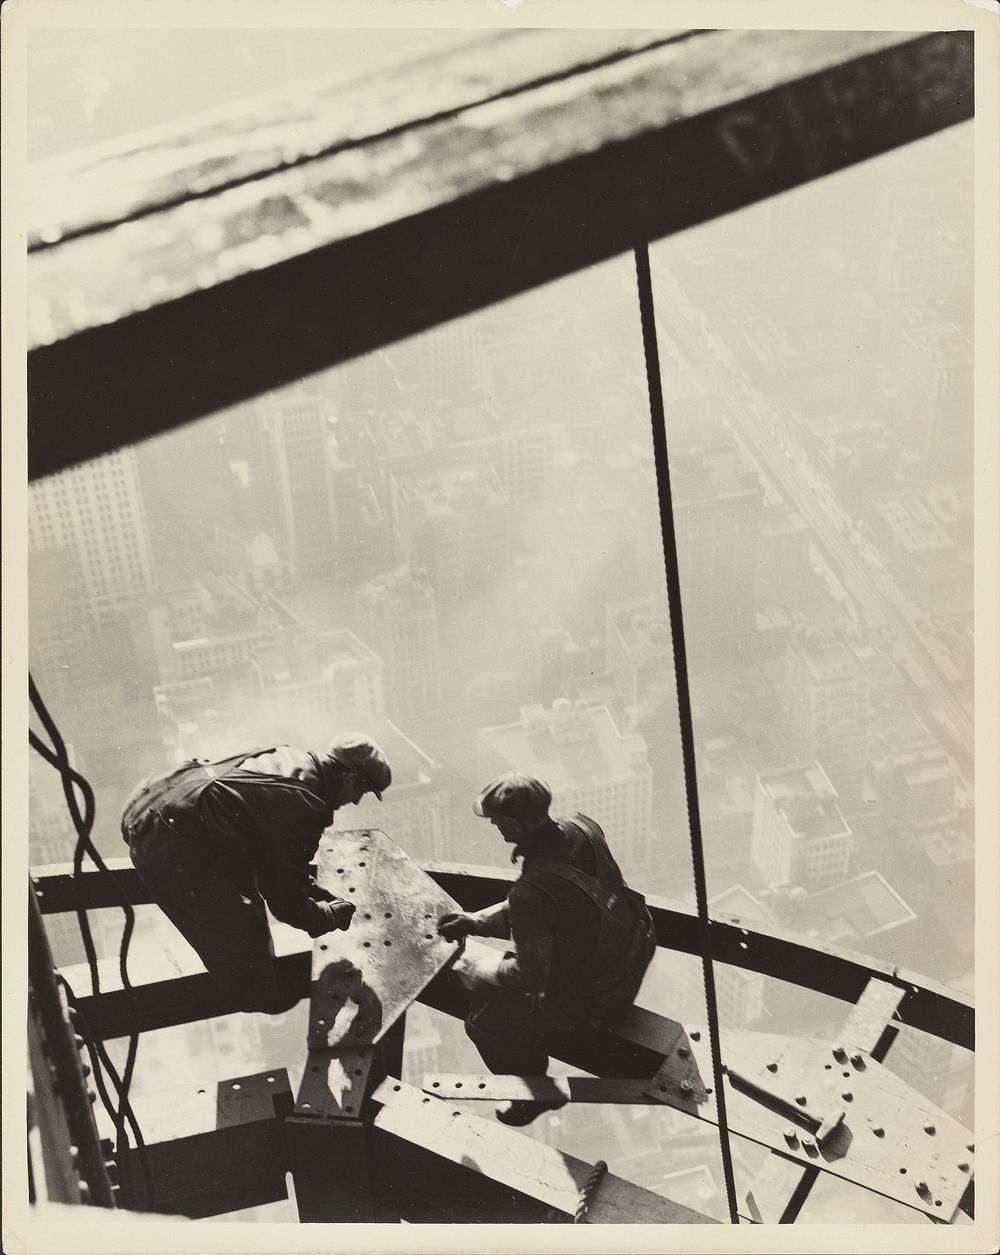 Empire State Building, New York by Lewis W Hine